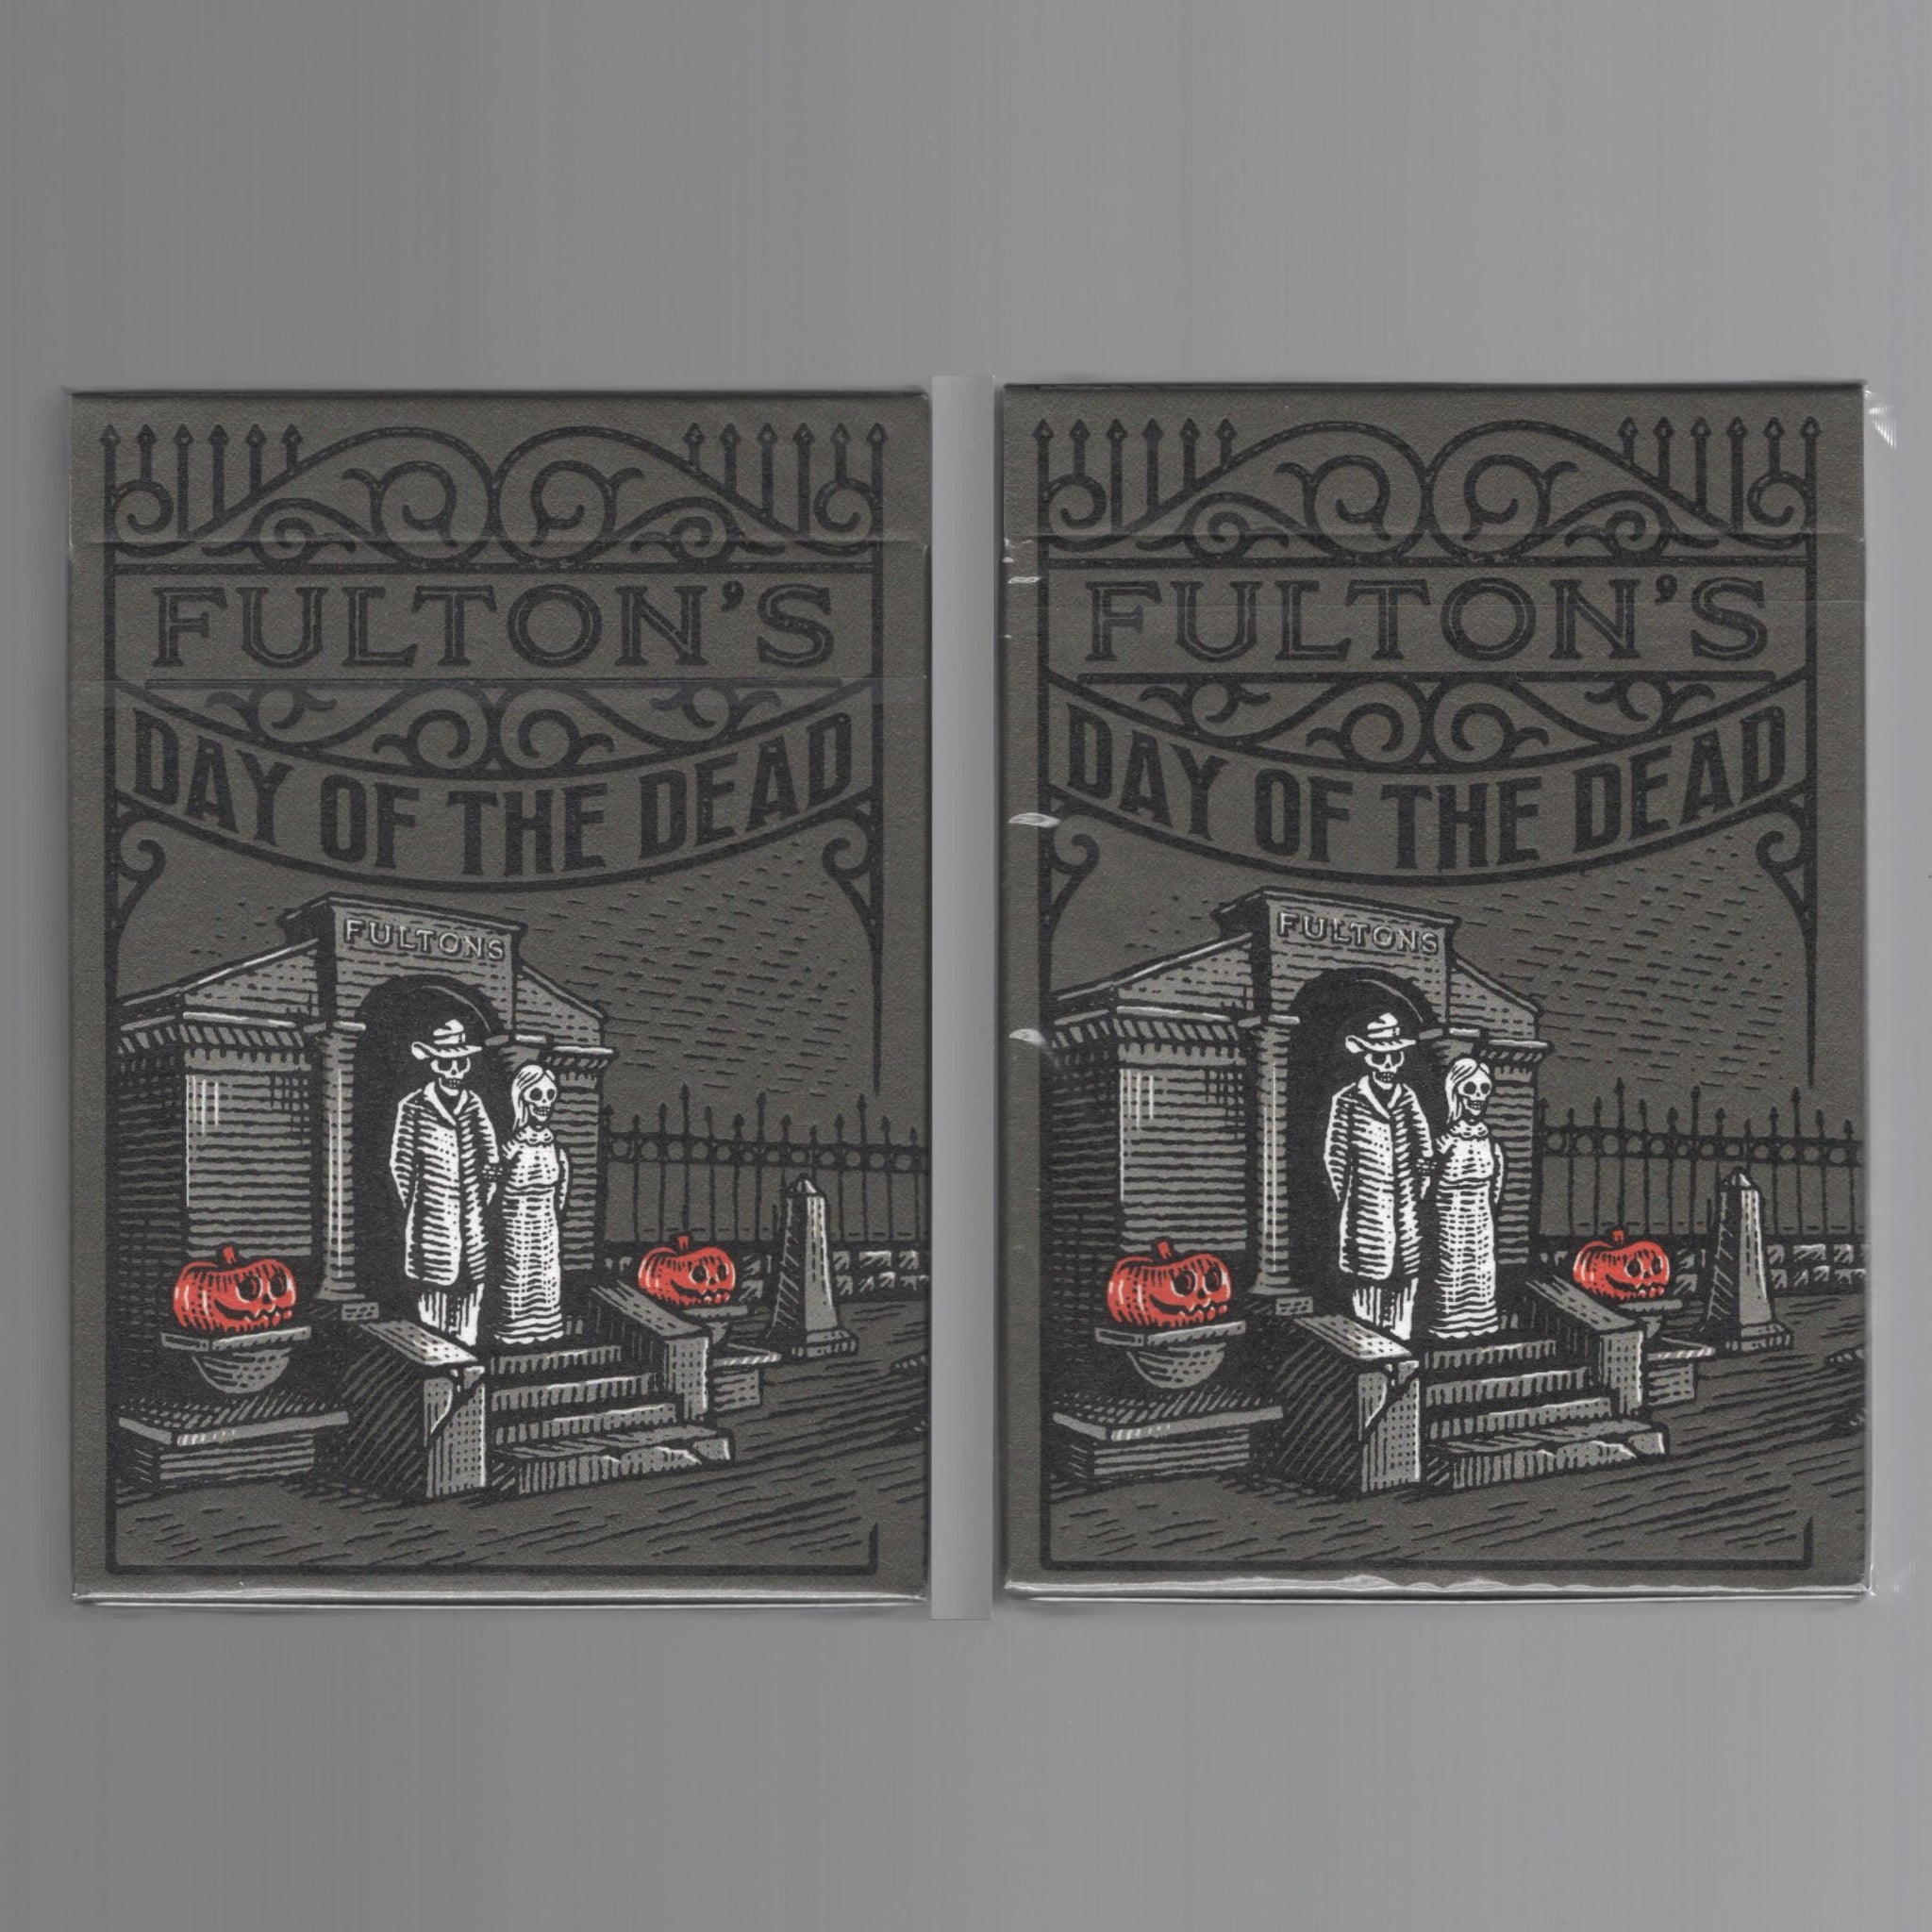 Fulton's Day of the Dead (Standard & Artist Proof) [AUCTION]